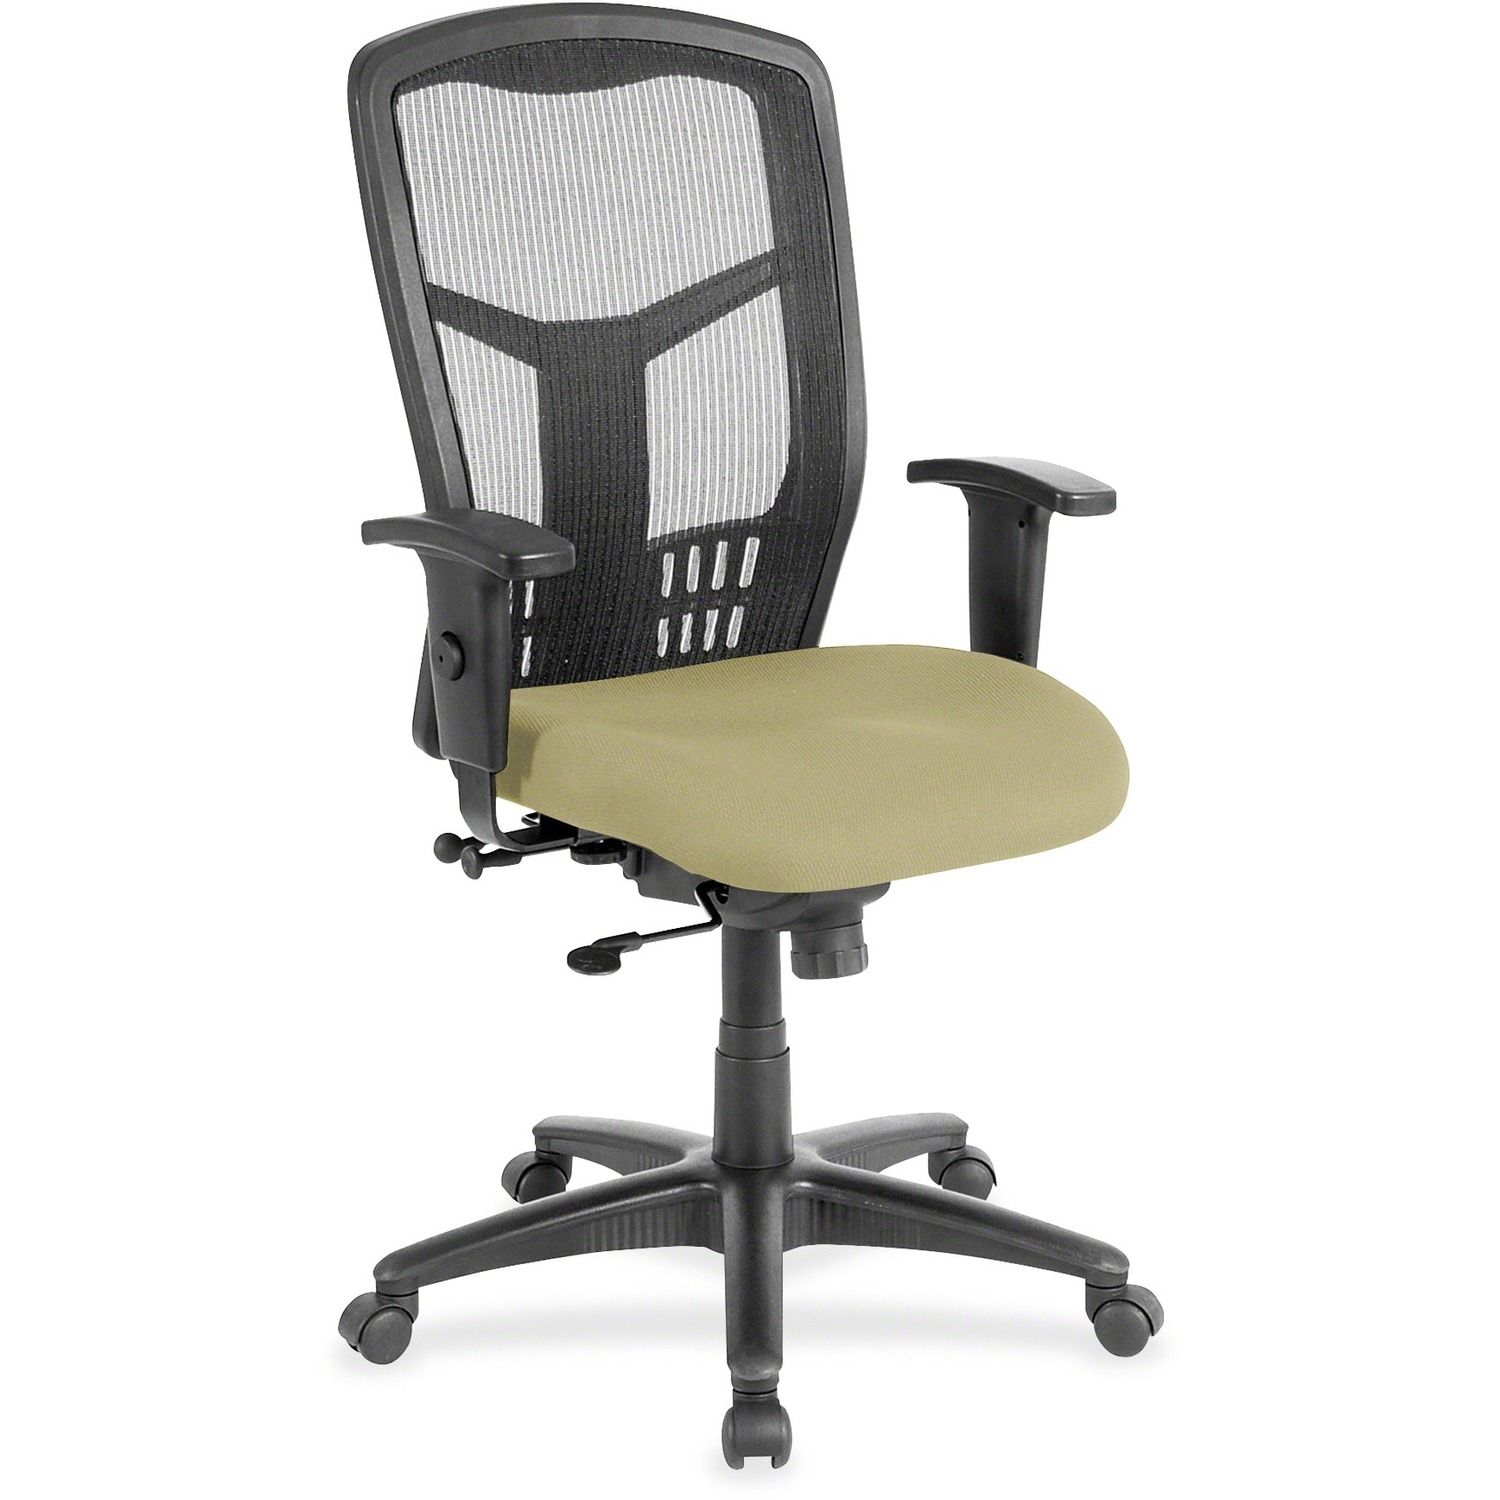 High-Back Executive Chair Mime Cocoa Fabric Seat, Steel Frame, 1 Each